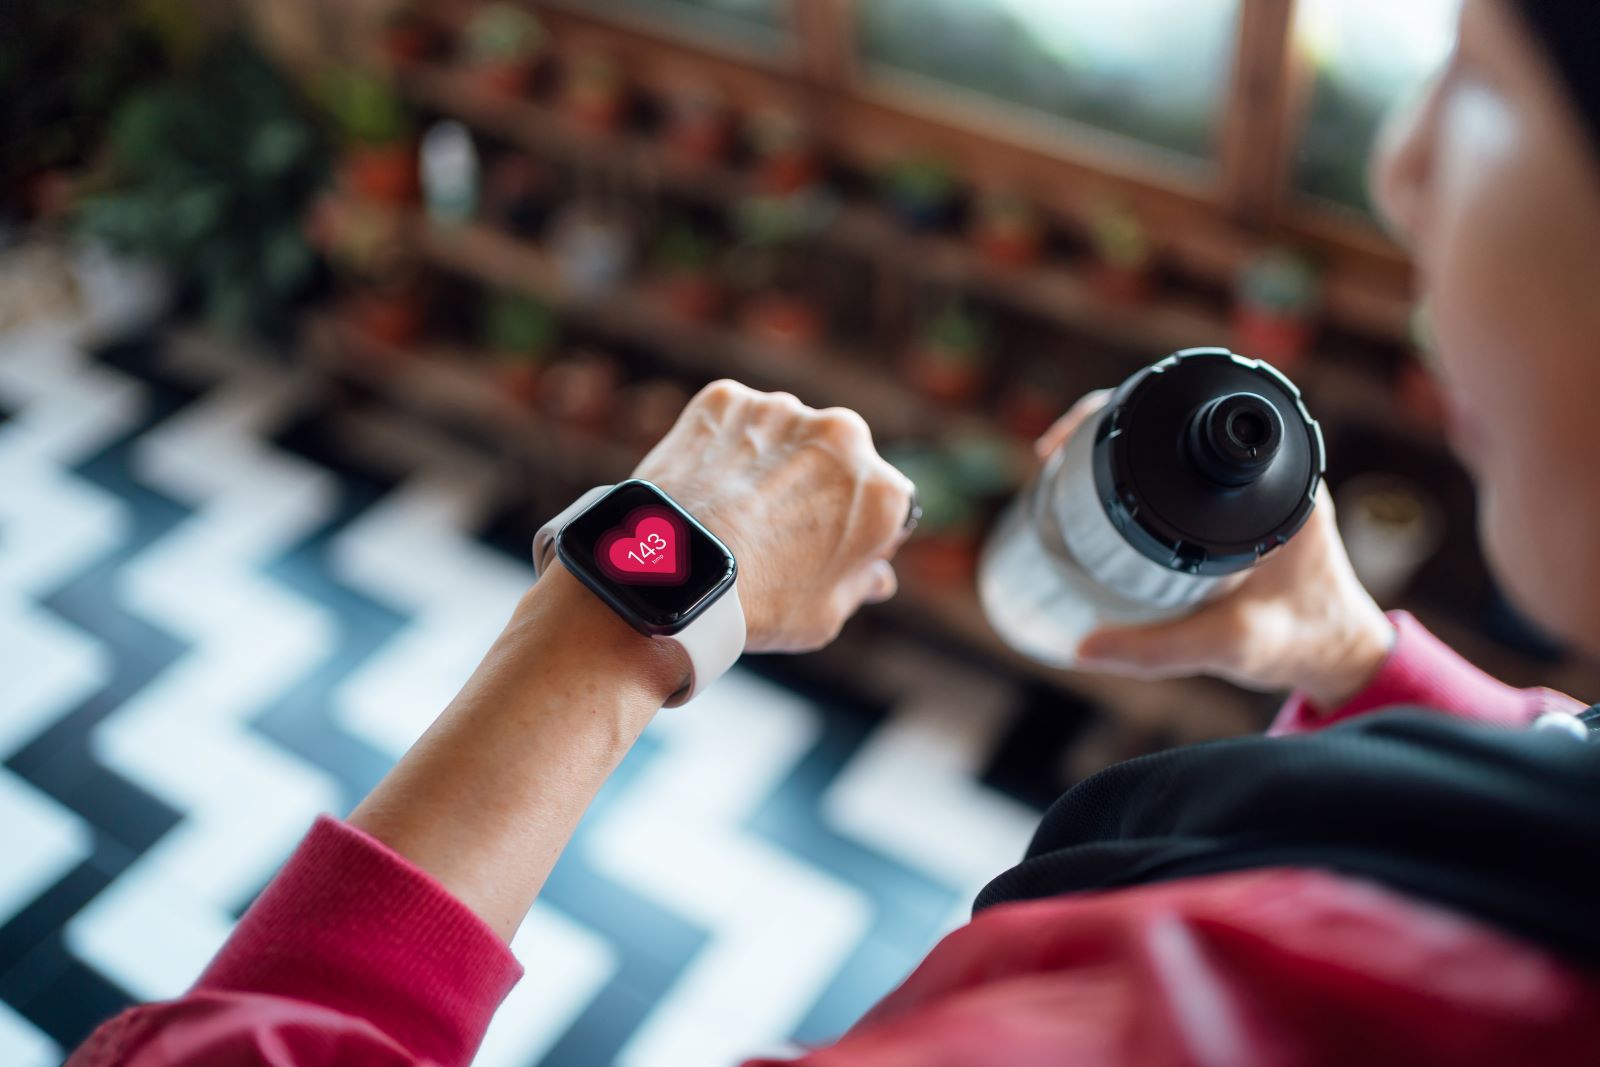 Can Wearable Tech Like Smartwatches Actually Detect AFib?